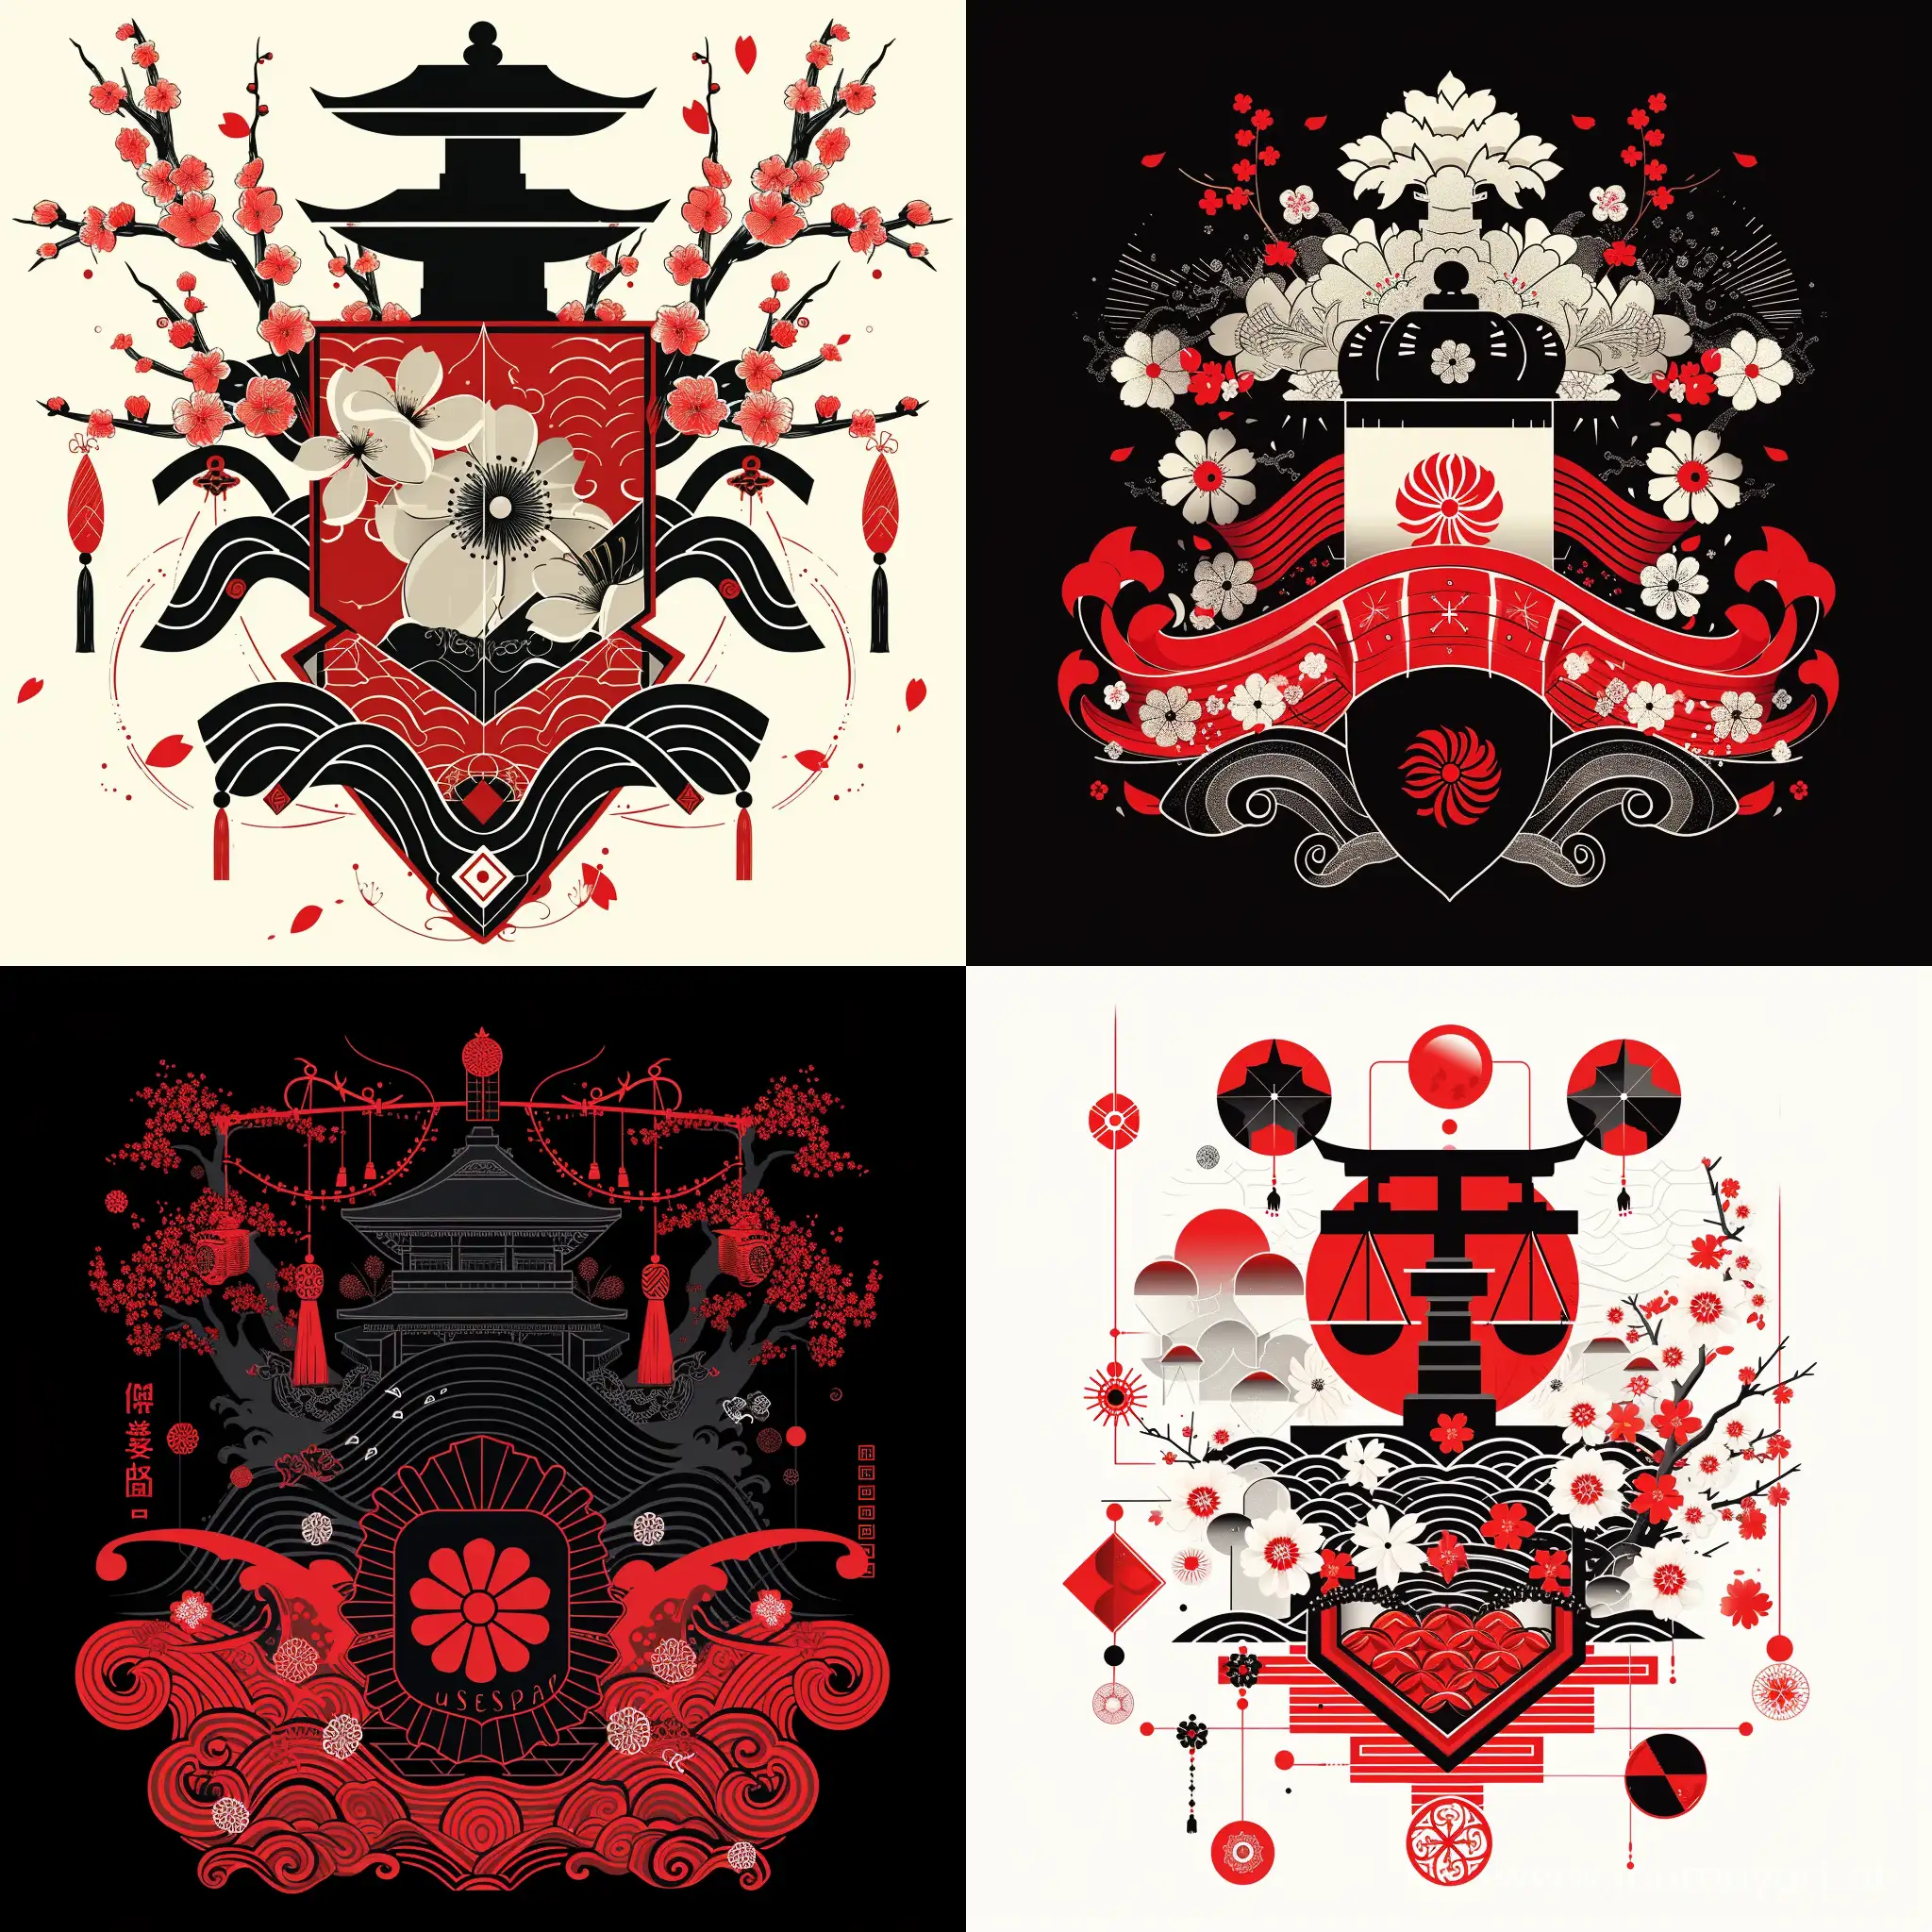 Japanese-Family-Crest-with-Sakura-Blossoms-and-Geometric-Patterns